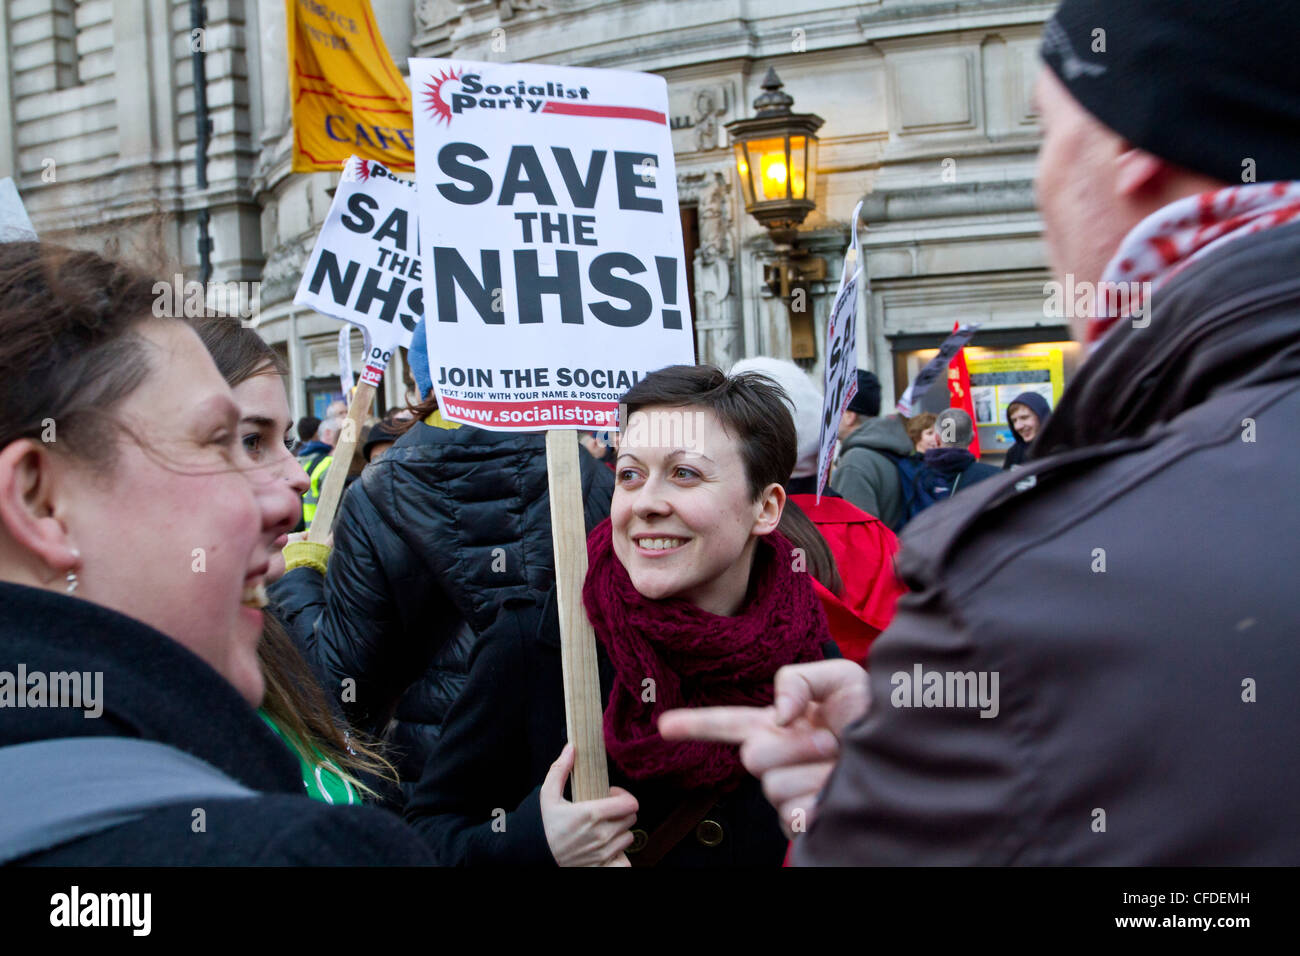 London, UK 7th March 2012. Save our NHS, A NHS protester seen here with a placard saying 'Save the NHS'. Stock Photo